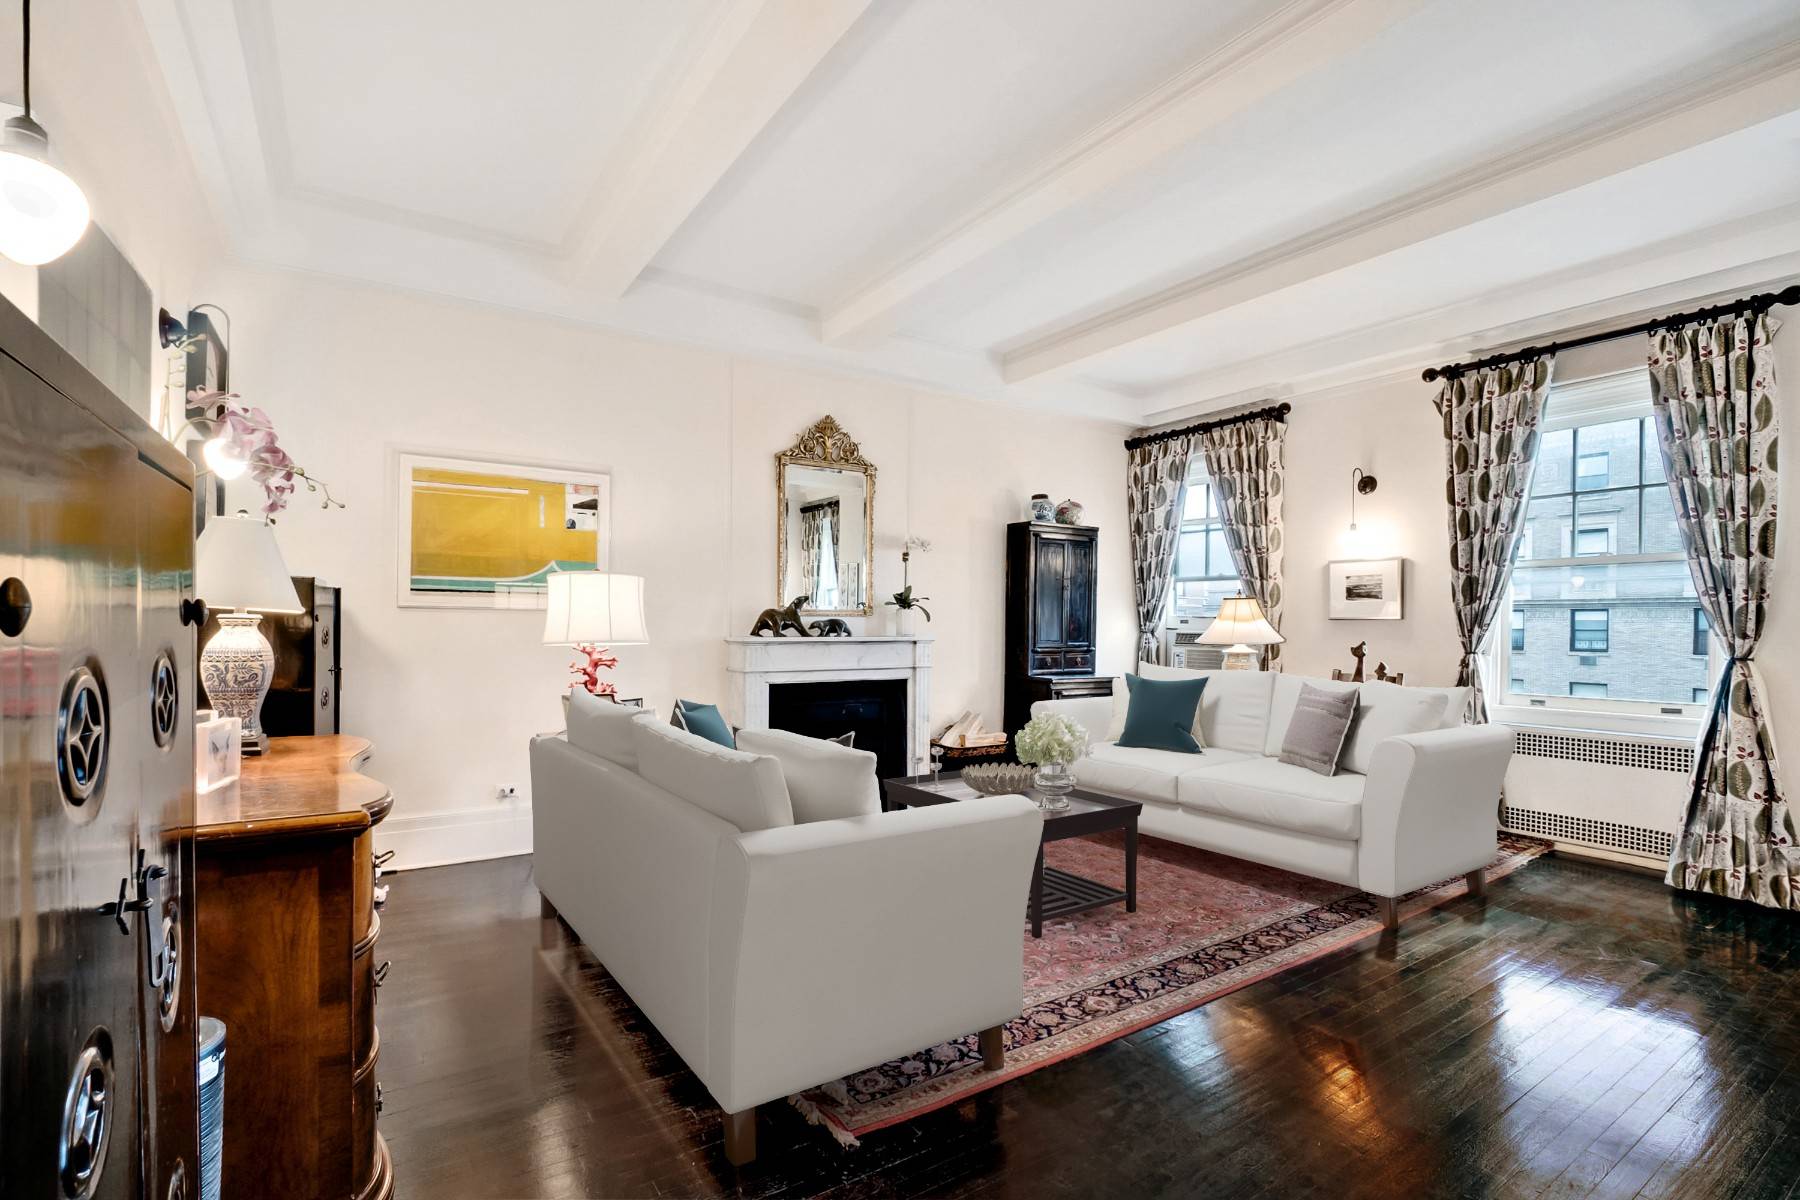 This is your chance to own one of the best 2 bedroom apartments on Park Avenue.